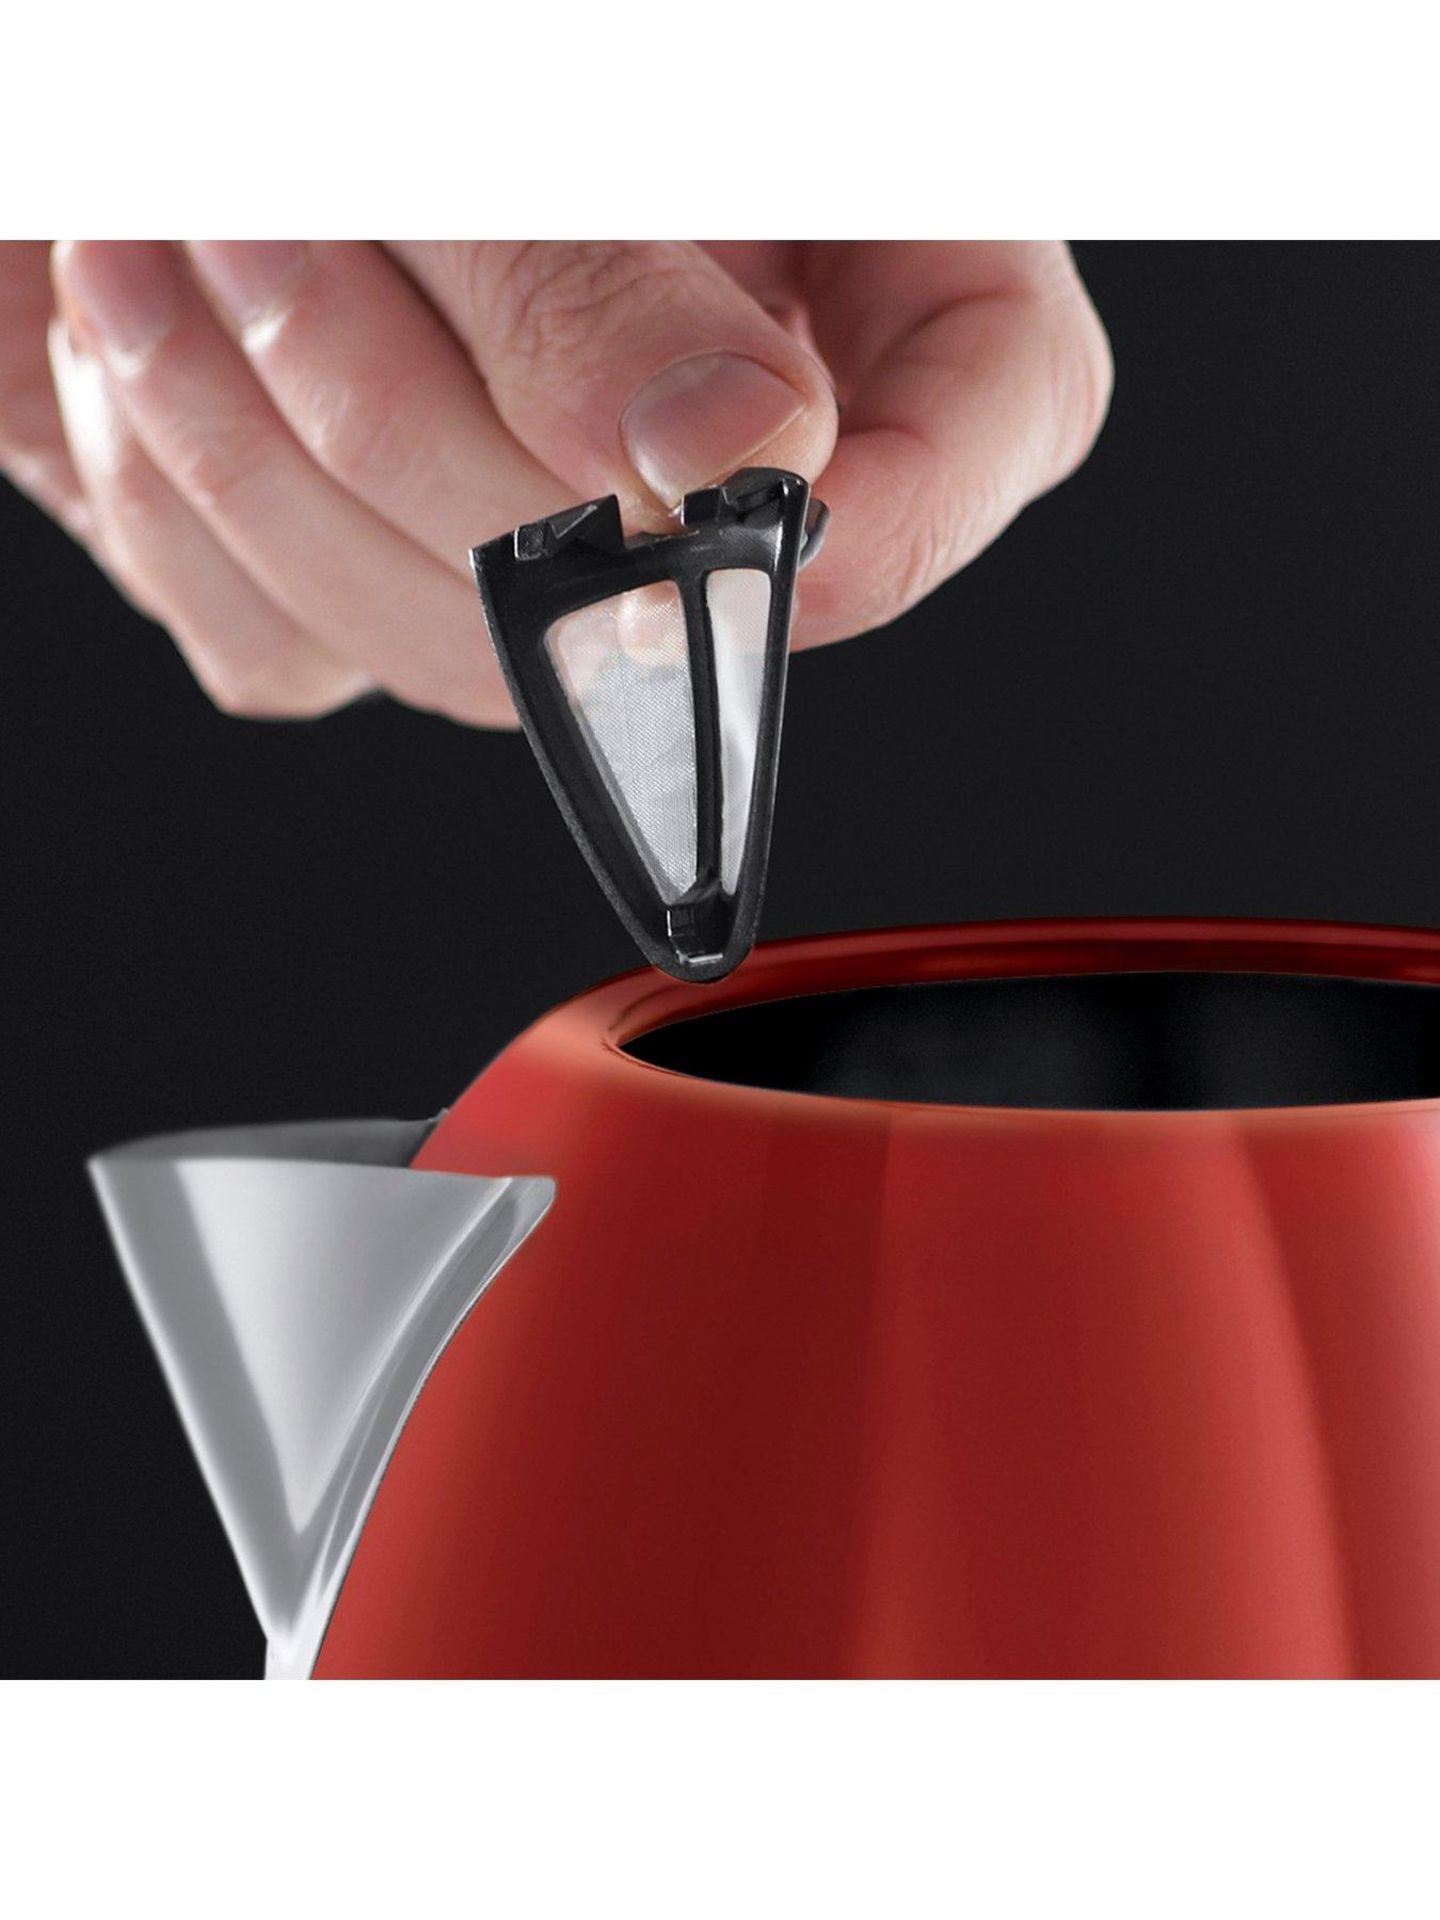 + VAT Brand New Russel Hobbs Red Dorchester Kettle - Perfect Pour - Saves Up To 70% Energy - - Image 2 of 5